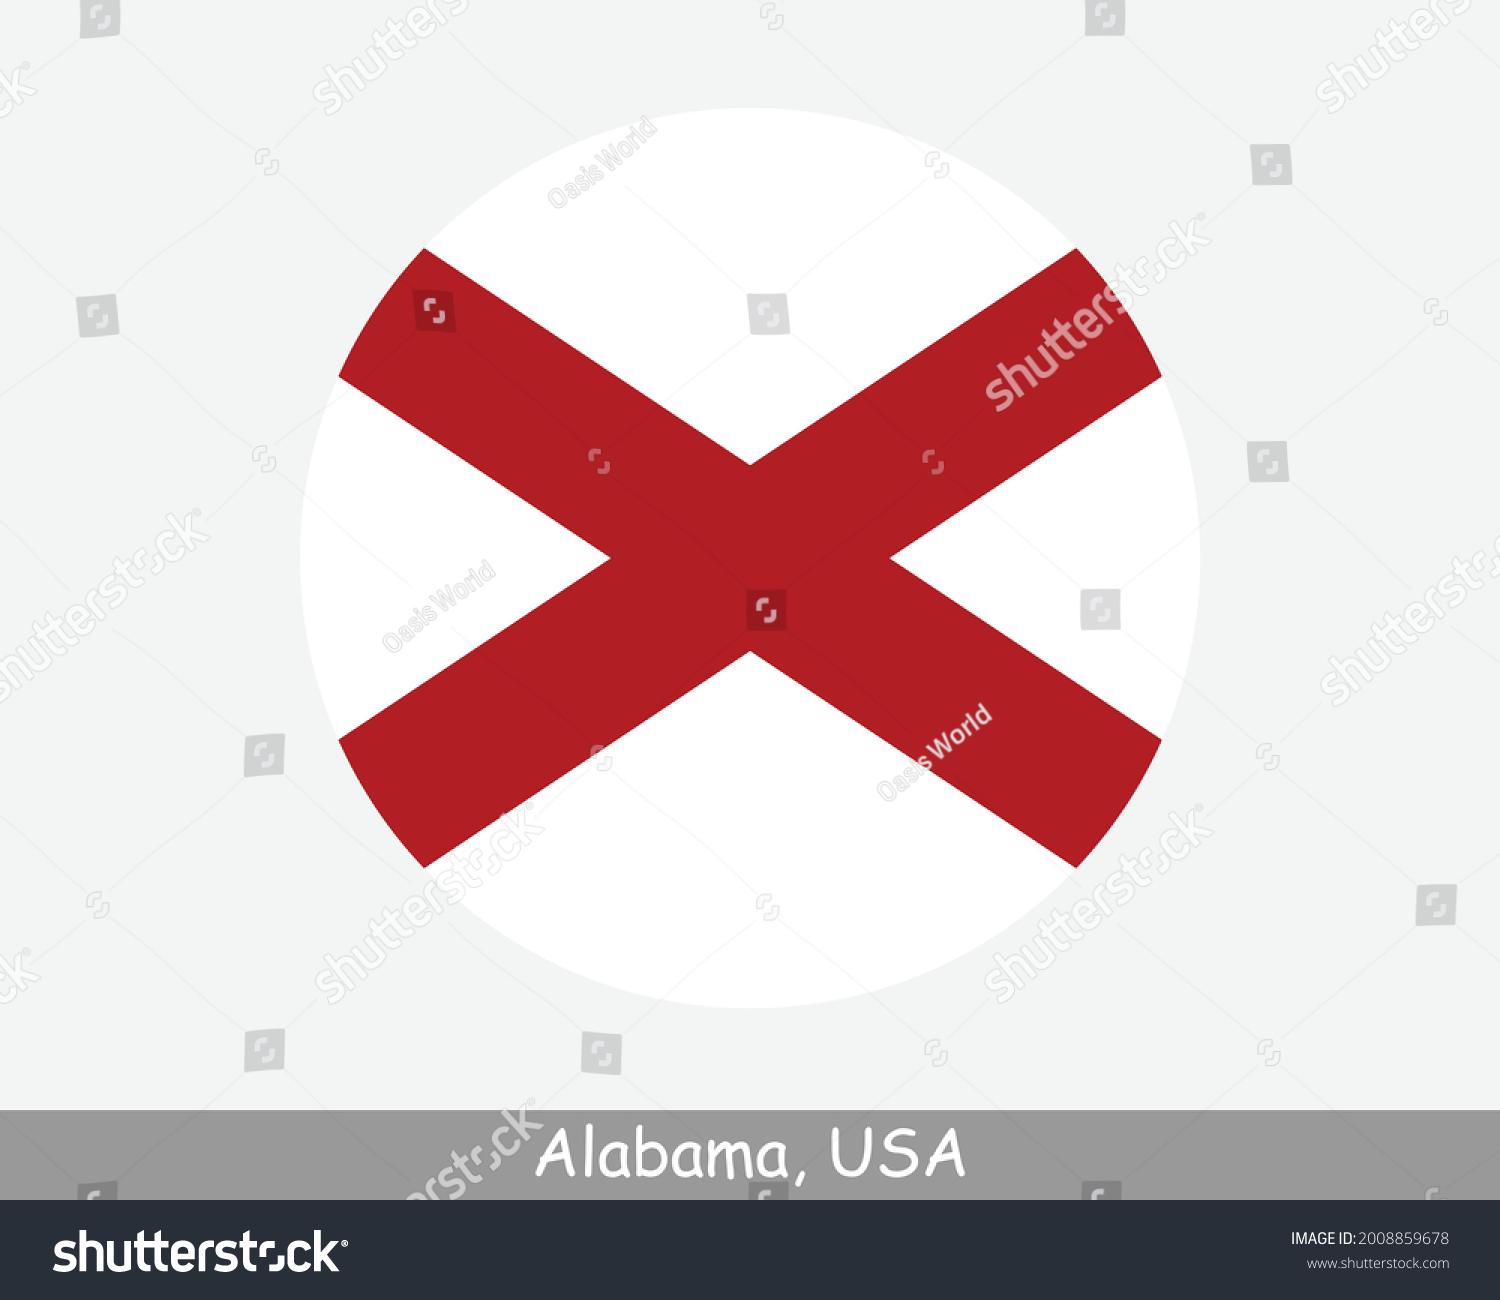 SVG of Alabama Round Circle Flag. AL USA State Circular Button Banner Icon. Alabama United States of America State Flag. EPS Vector svg